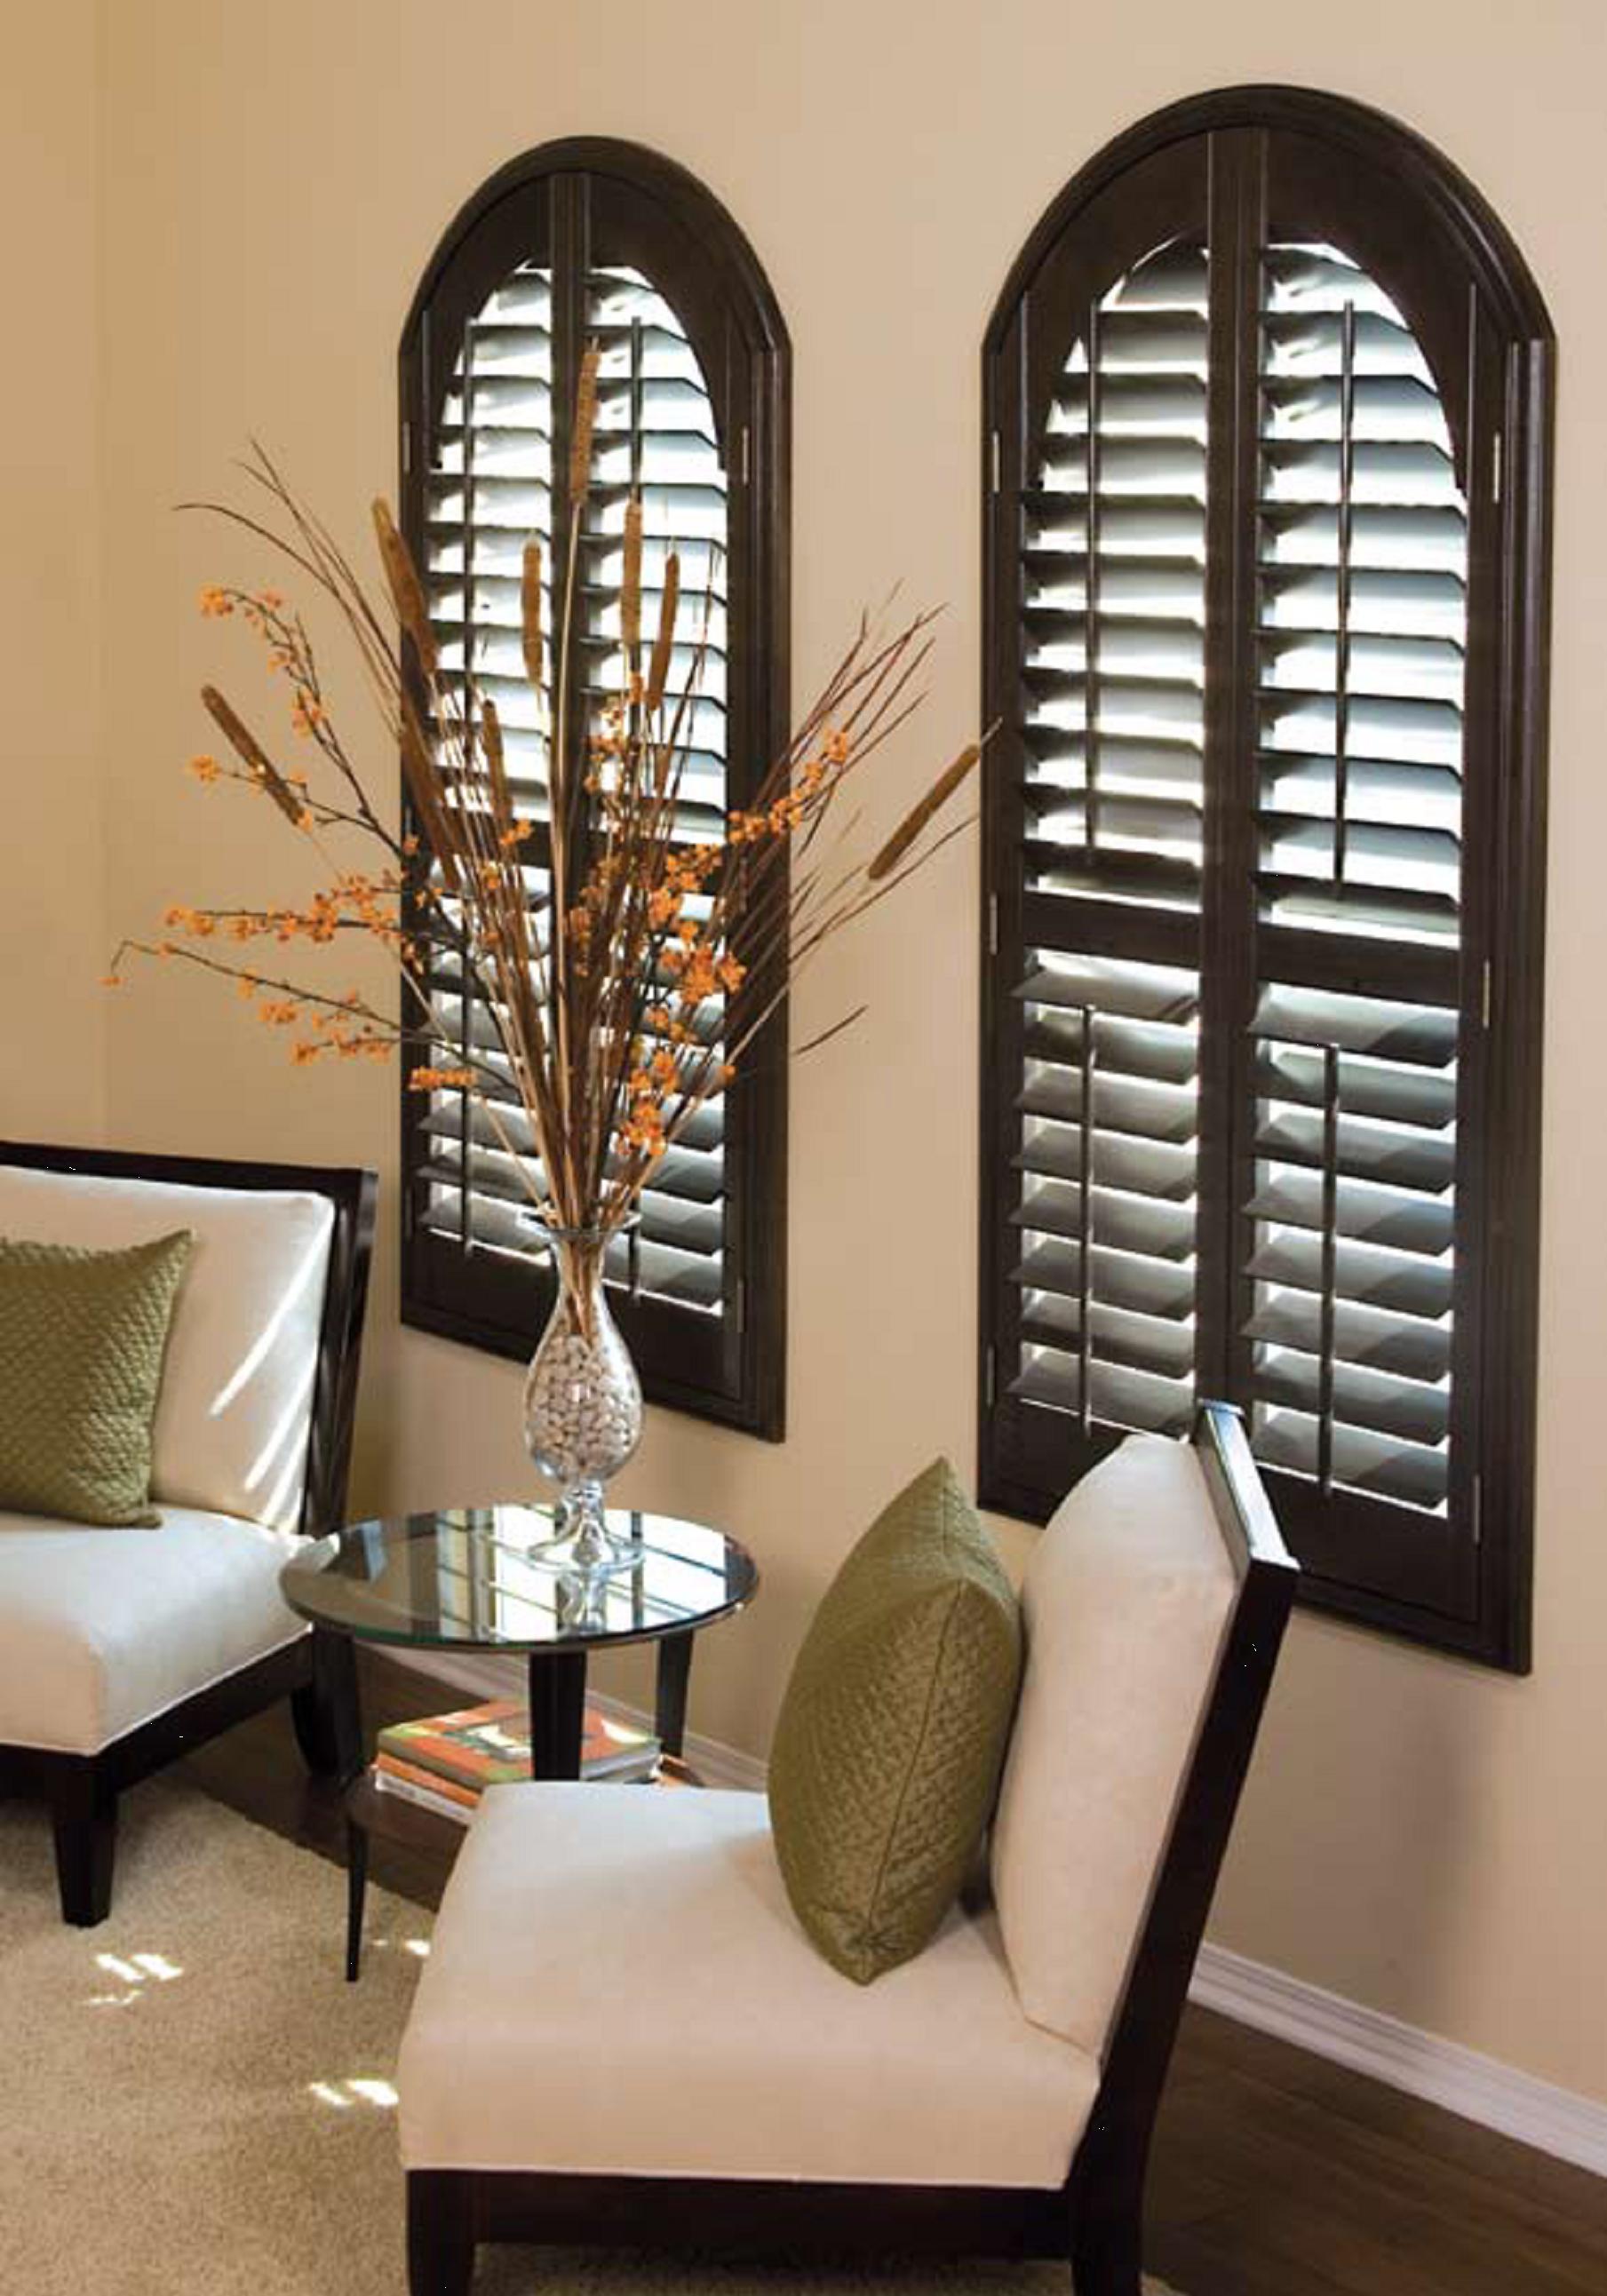 WOOD BLINDS  FAUX WOOD BLINDS, SHUTTERS  CELLULAR SHADES